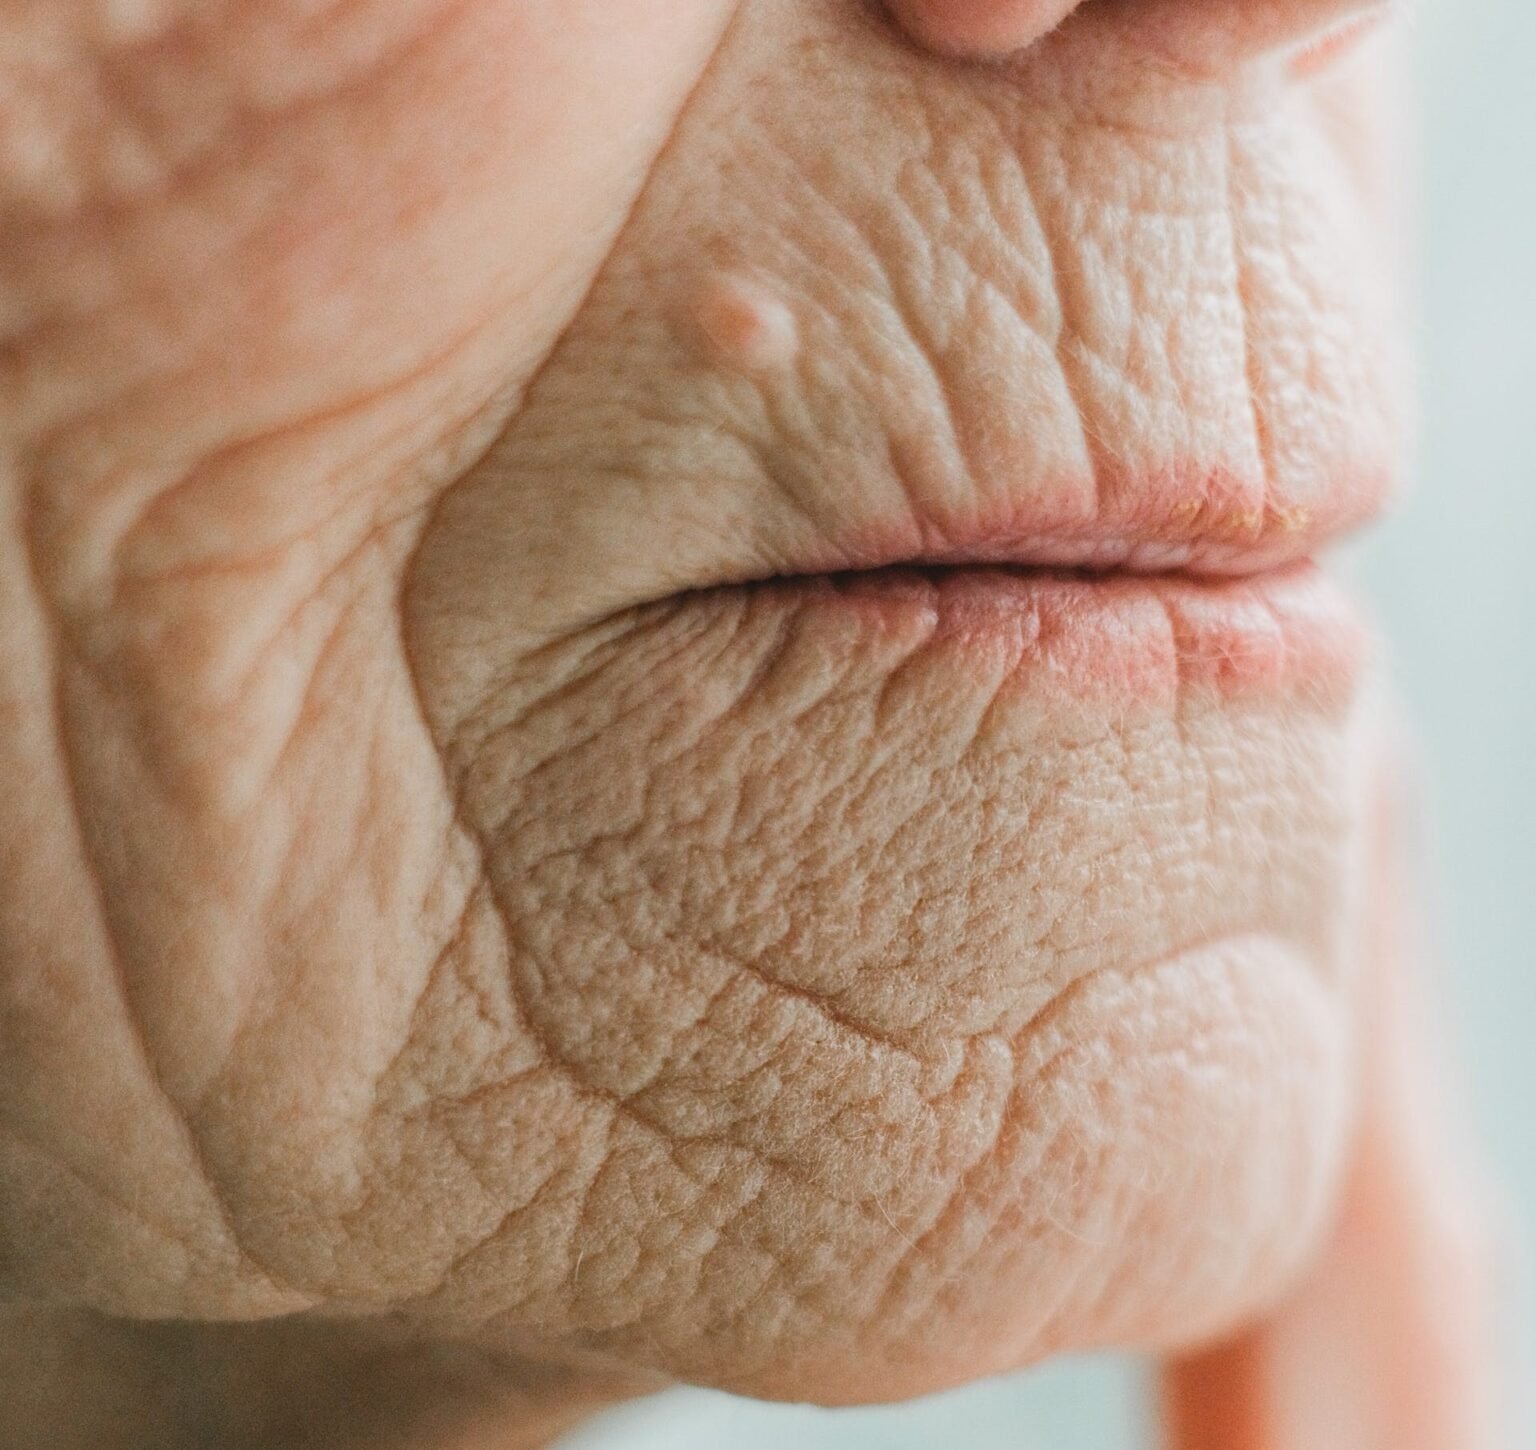 How to treat Wrinkles around the mouth